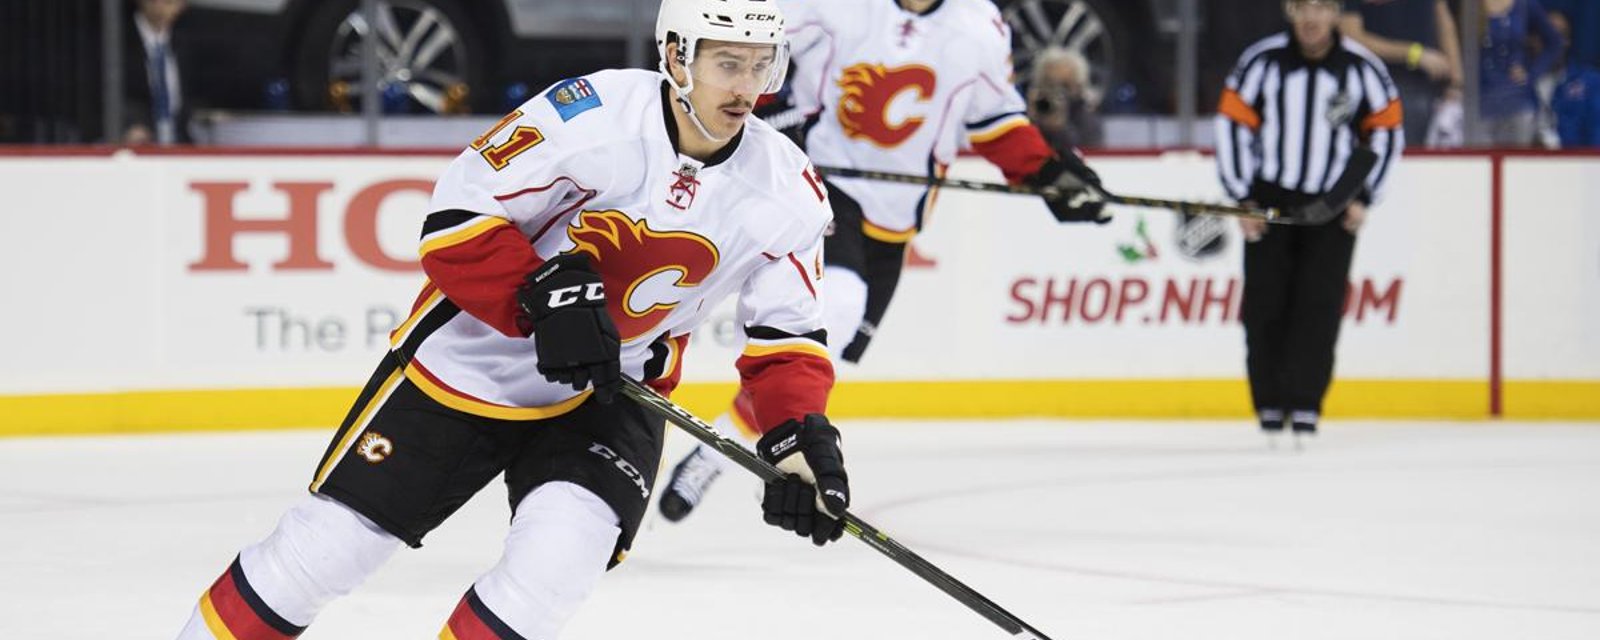 Mikael Backlund in the race for coveted award! 